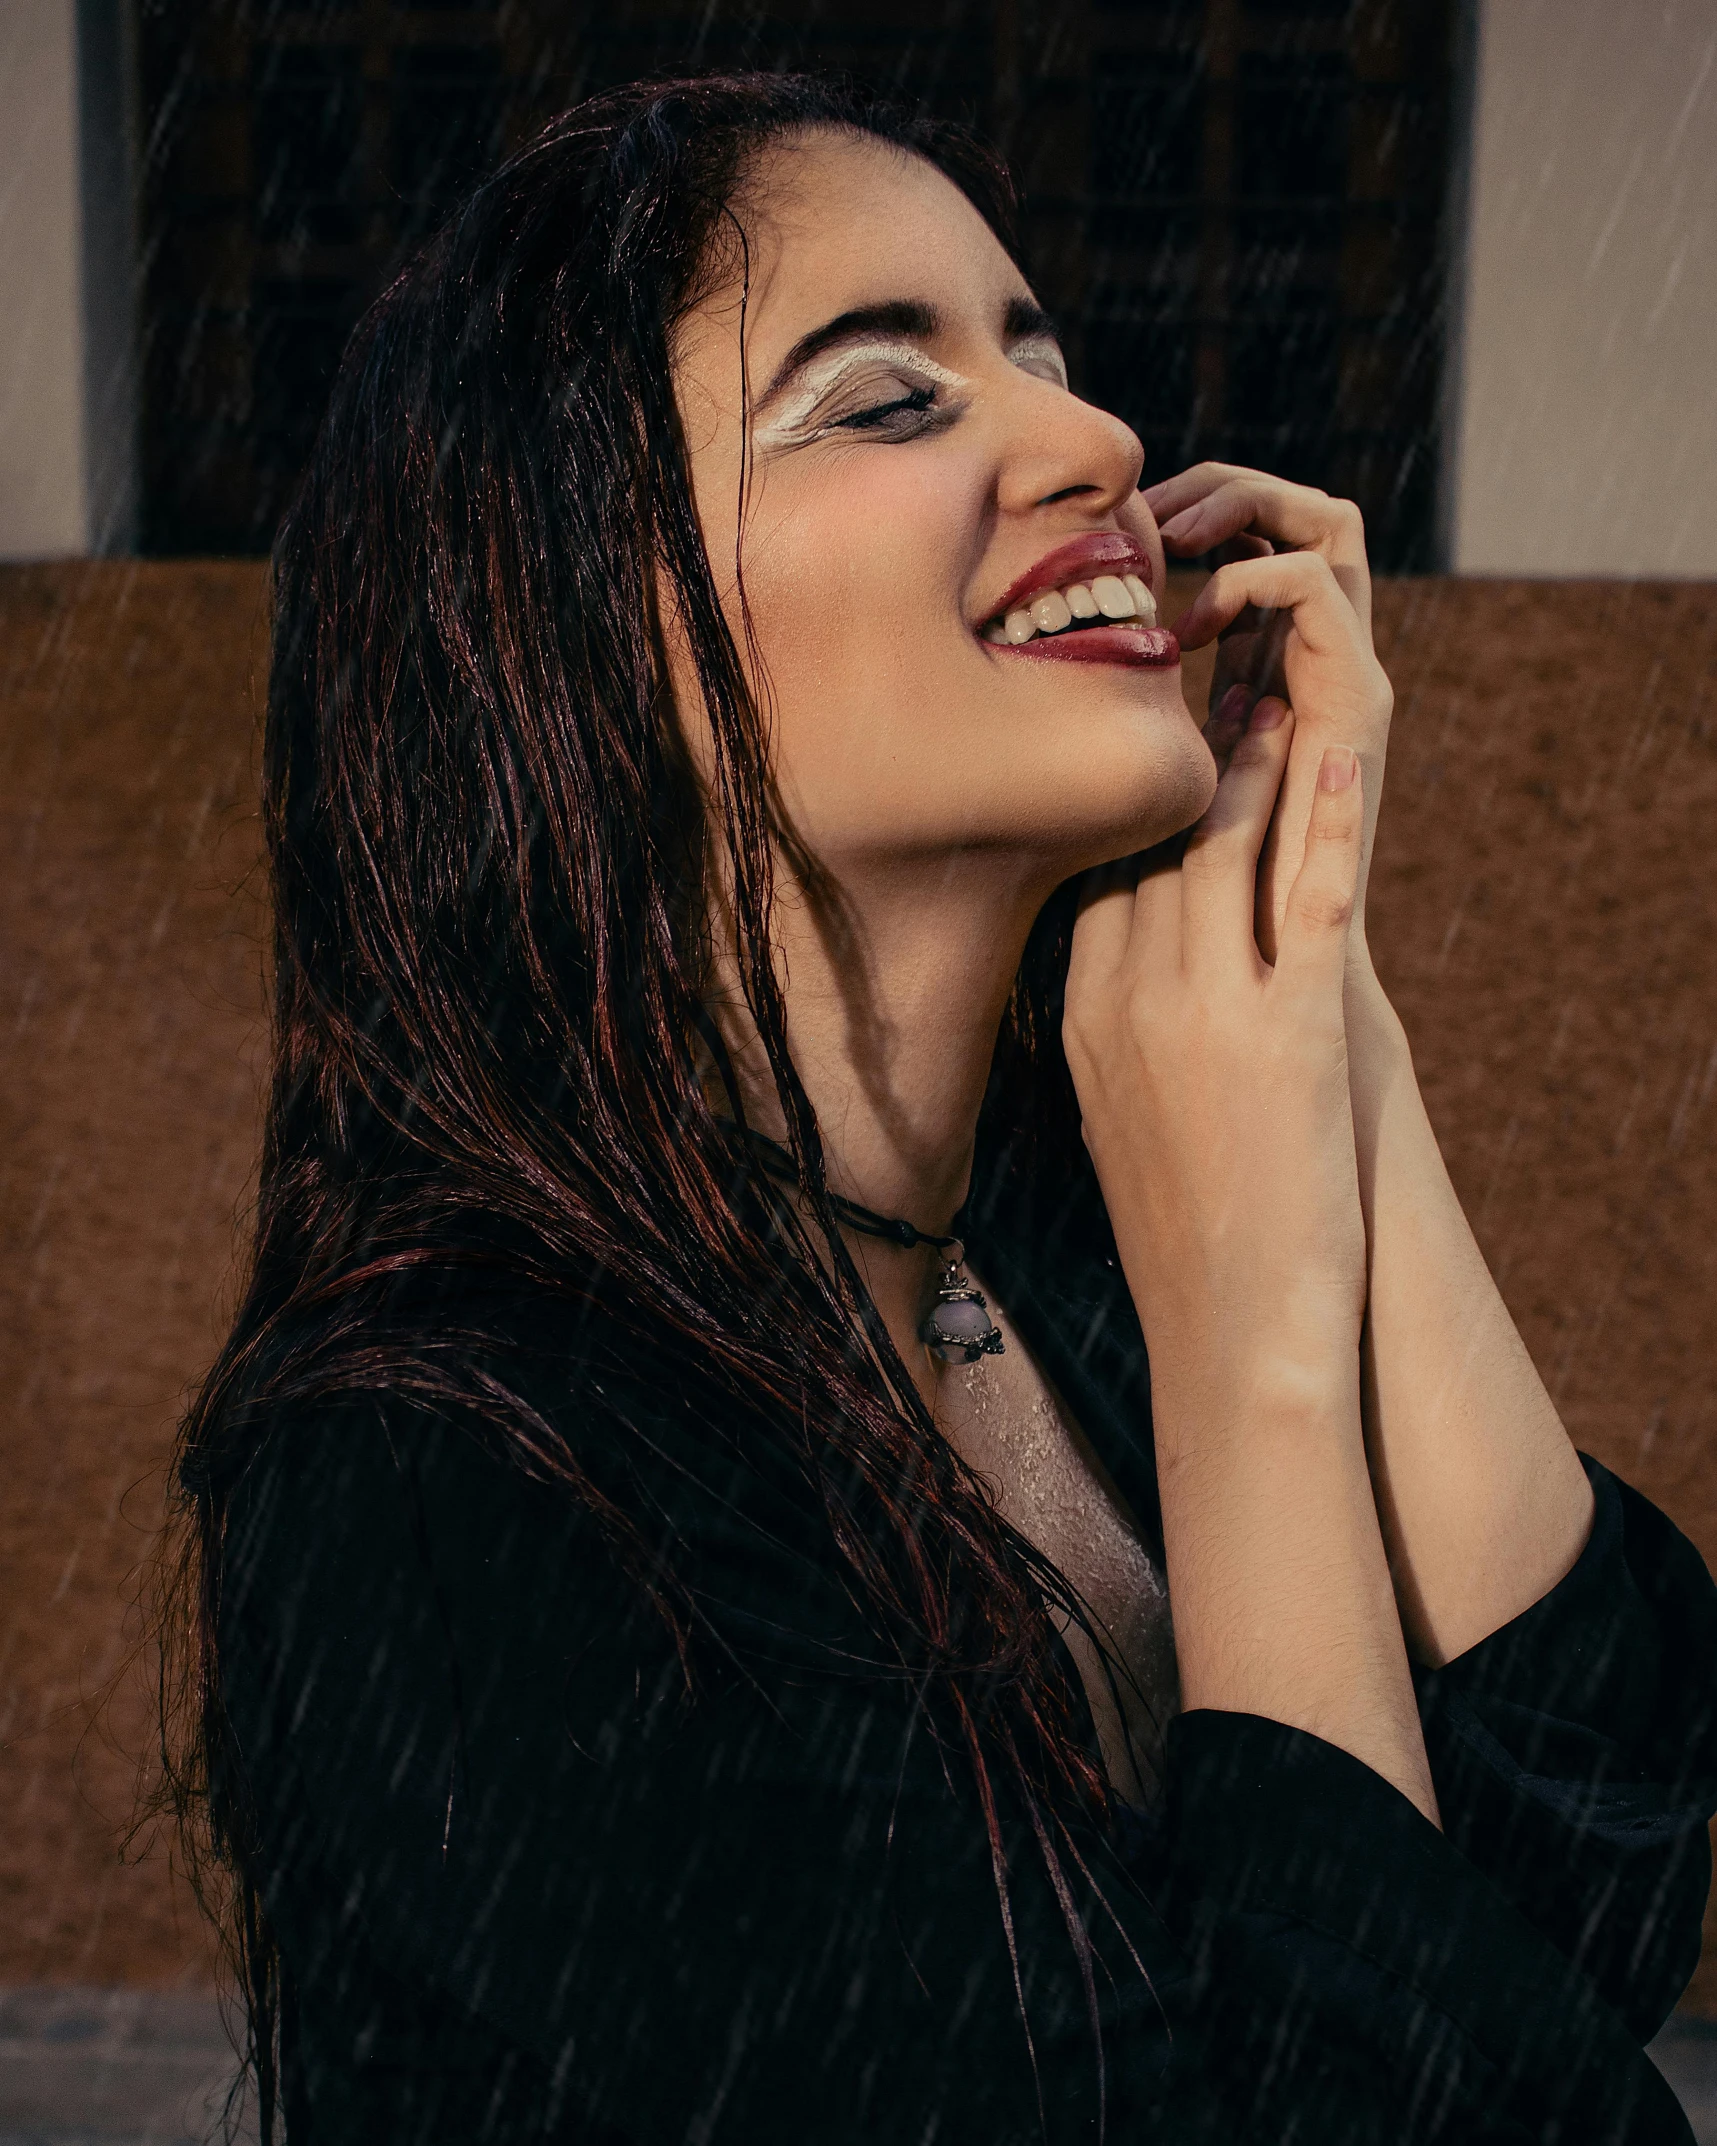 a woman in black shirt smiling in the rain